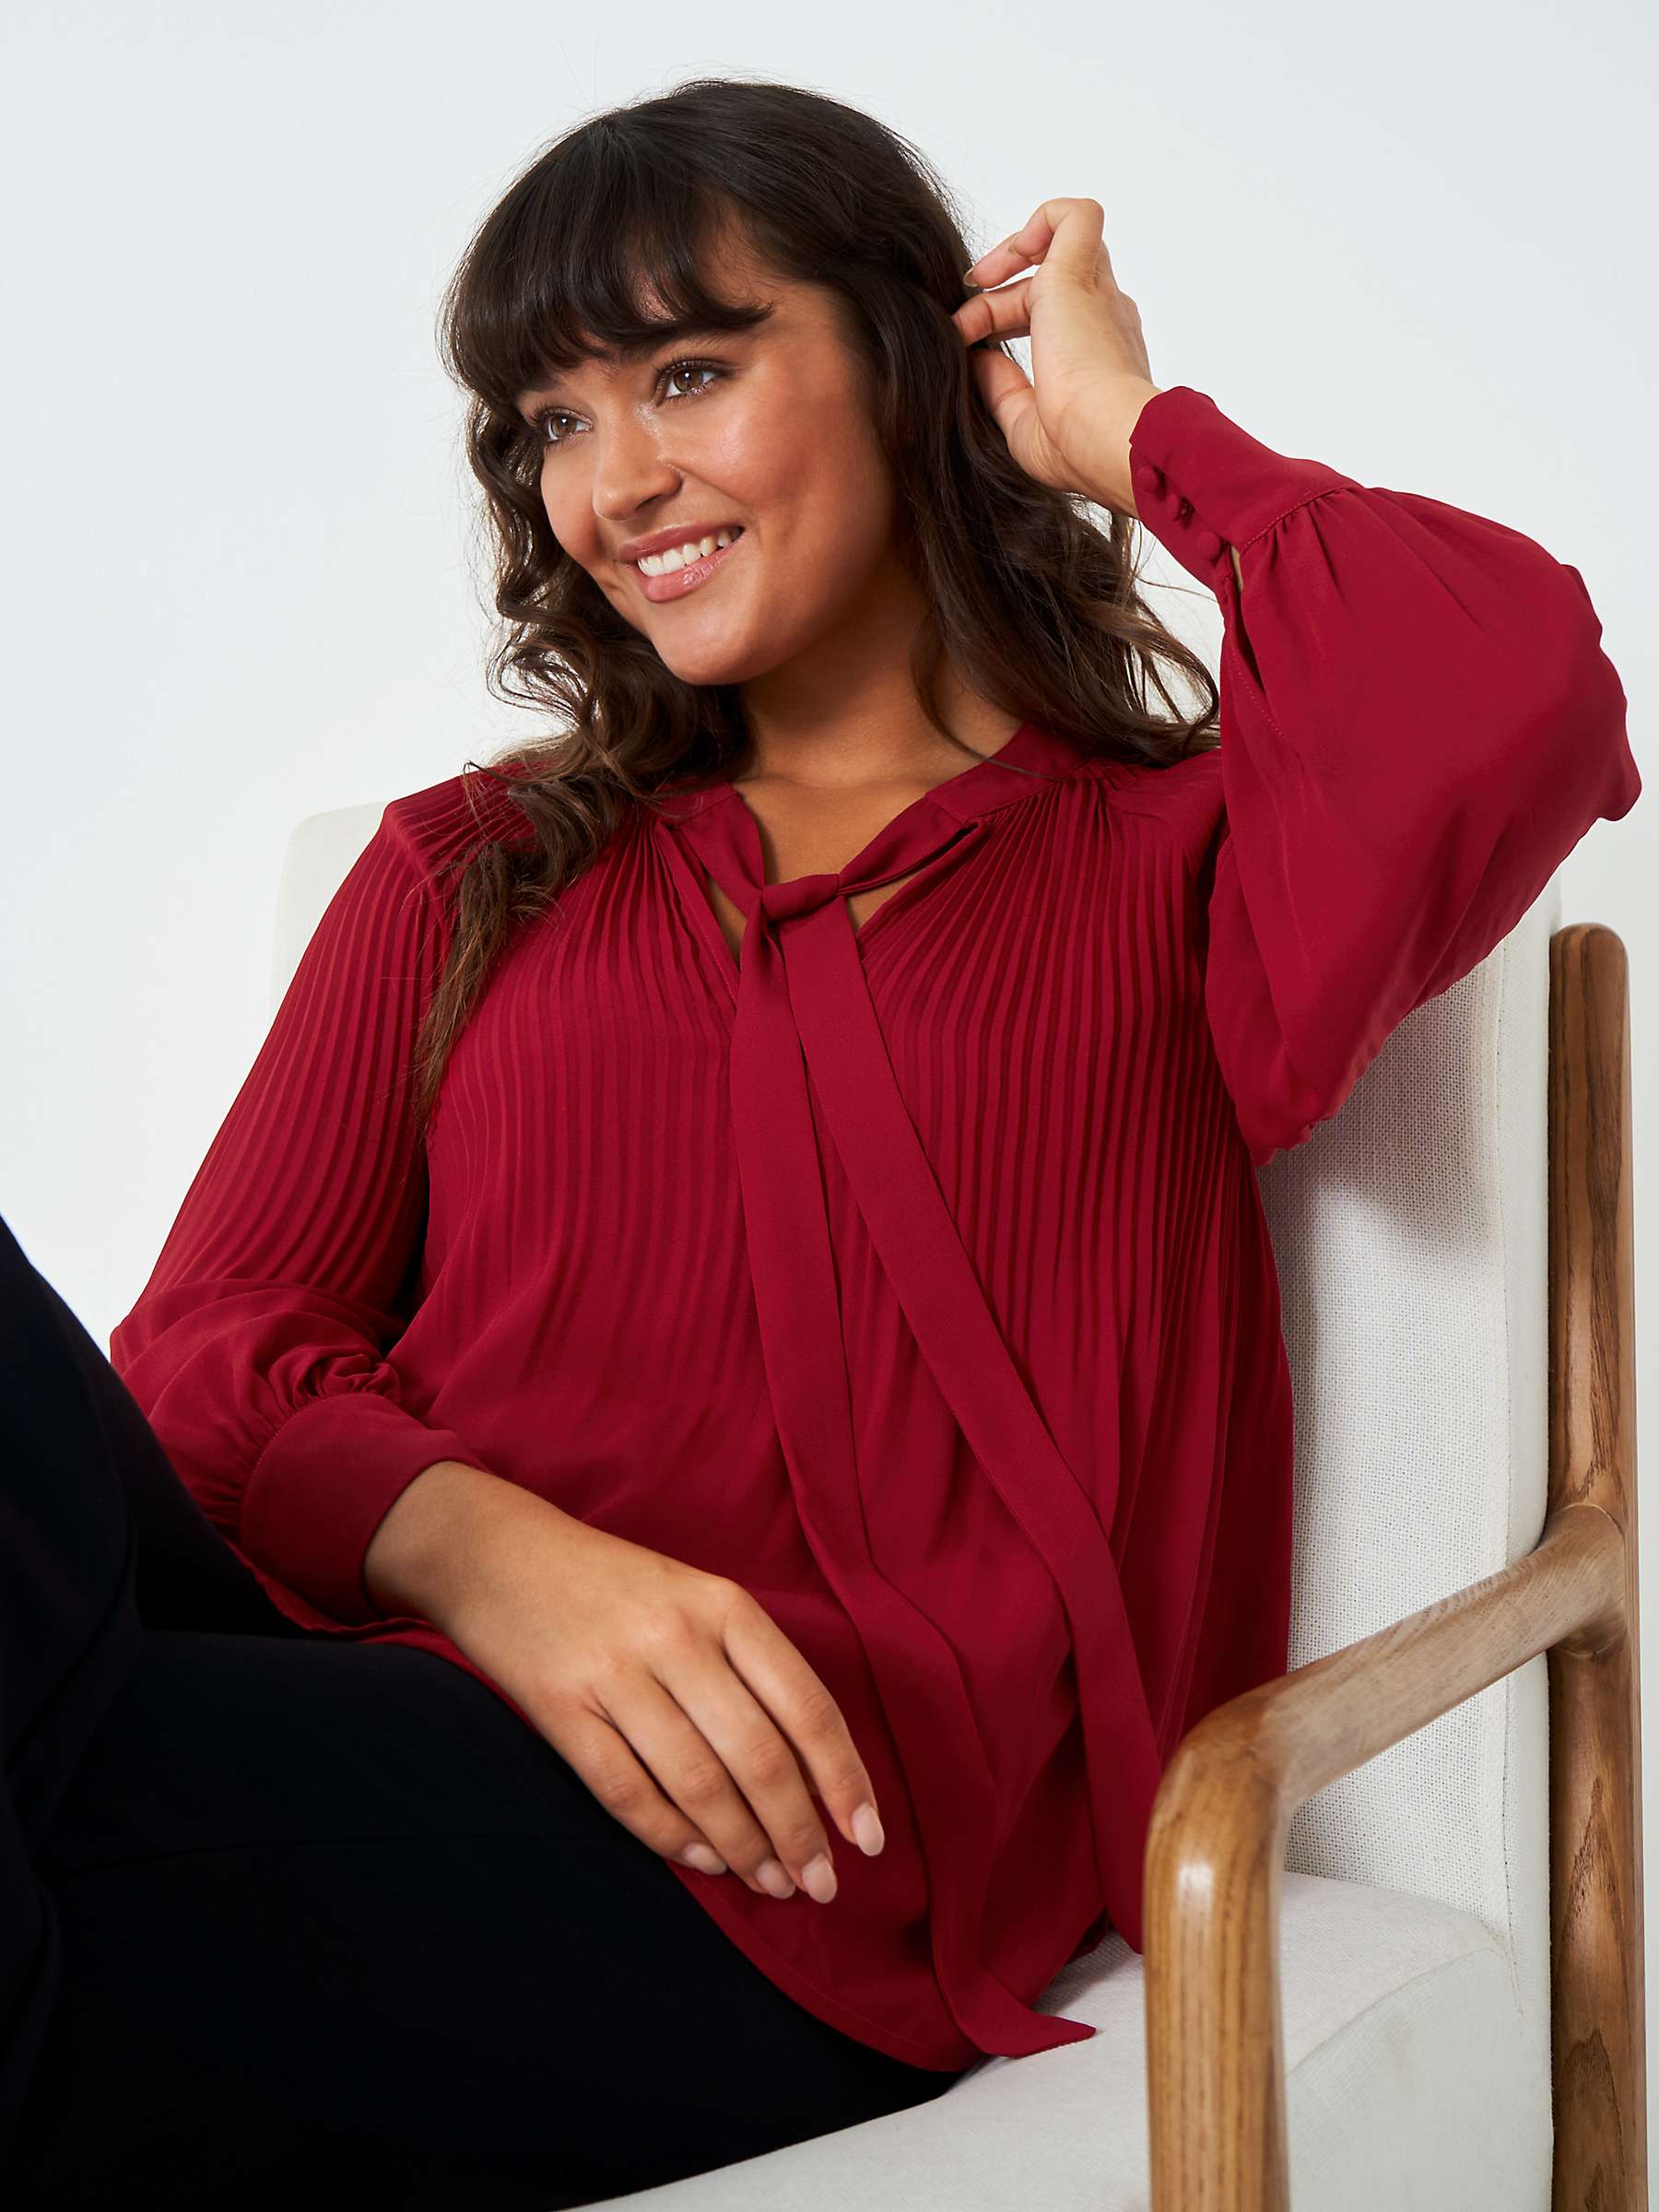 Buy Crew Clothing Janey Pleated Sleeve Top, Red Wine Online at johnlewis.com